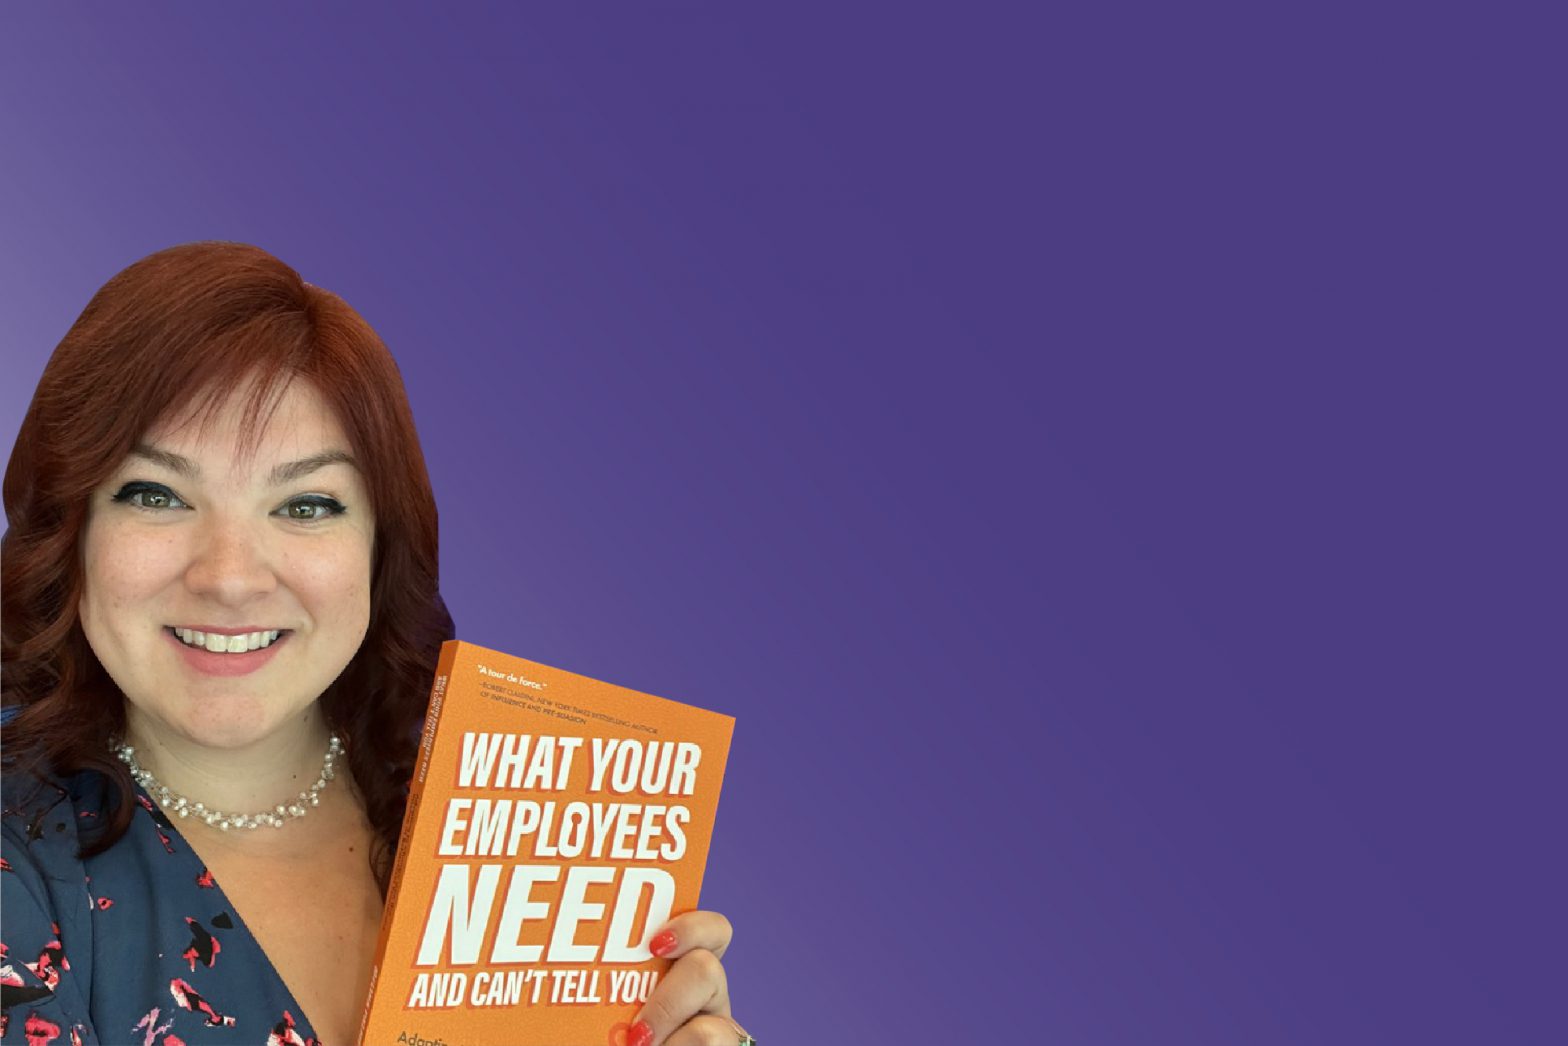 worxogo interviews Melina Palmer, author of What Your Employees Need and Can't Tell You